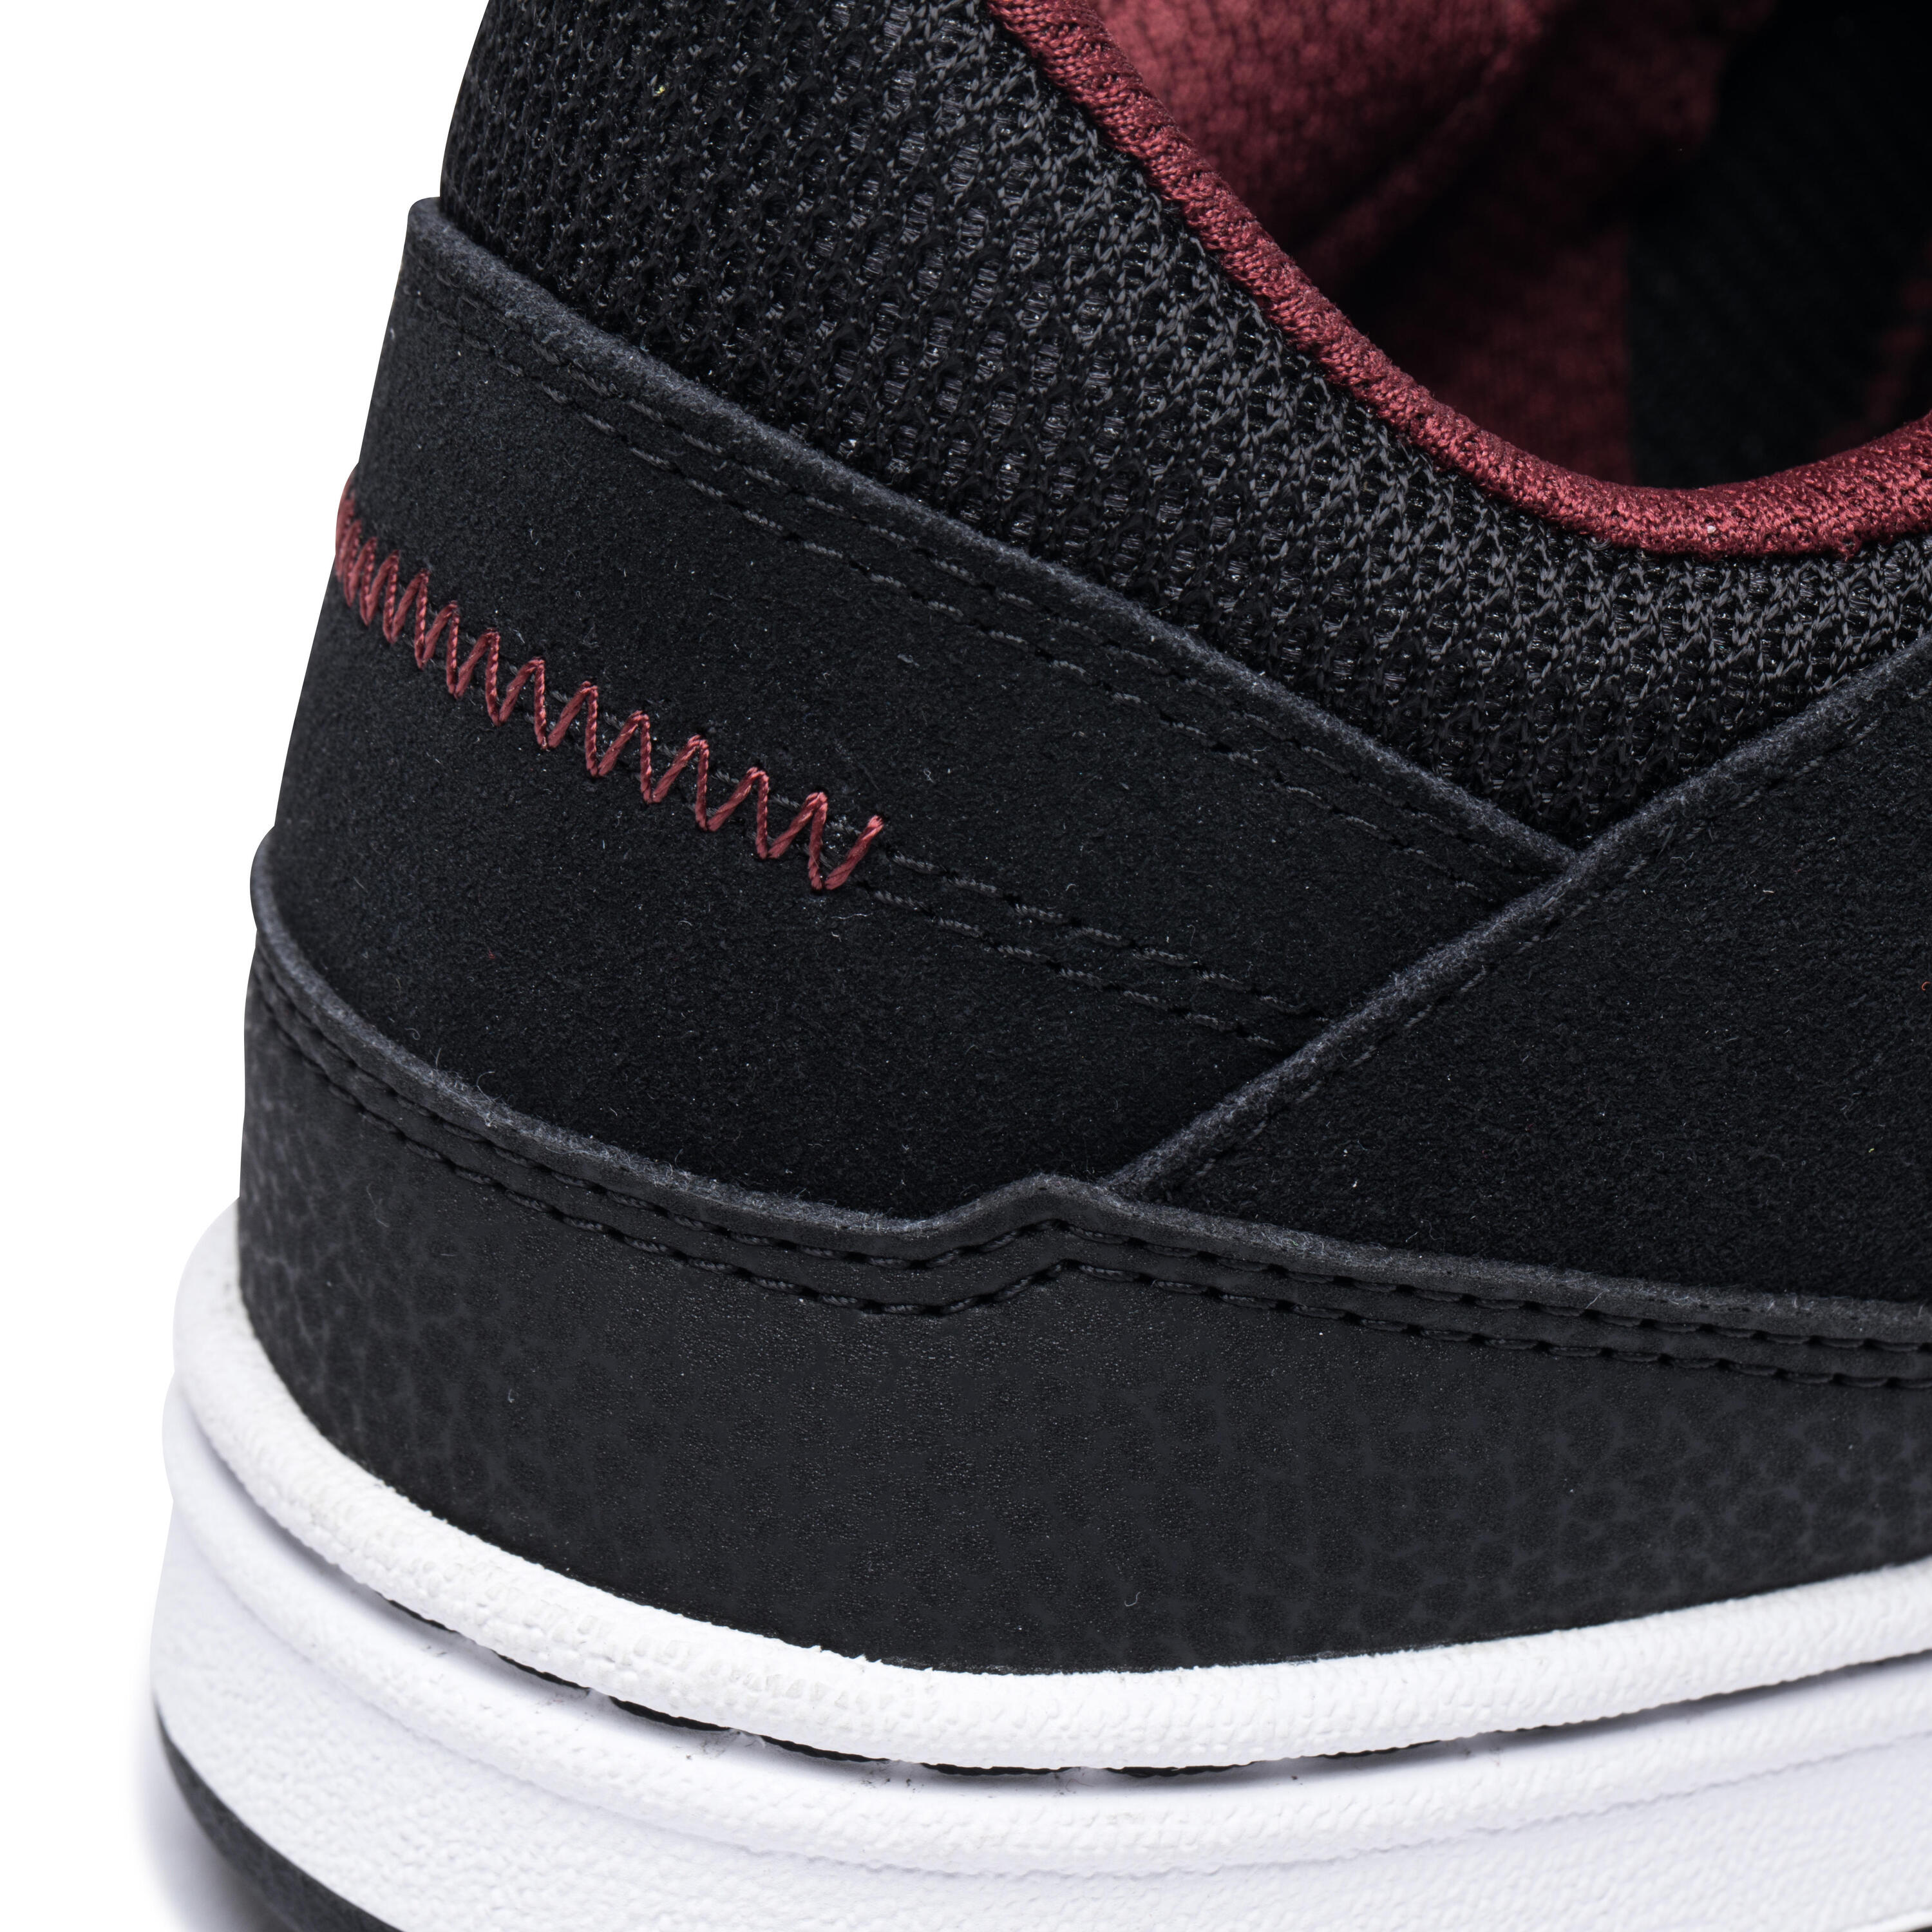 Crush 500 Adult Low-Top Cupsole Skate Shoes - Black/Burgundy 8/14